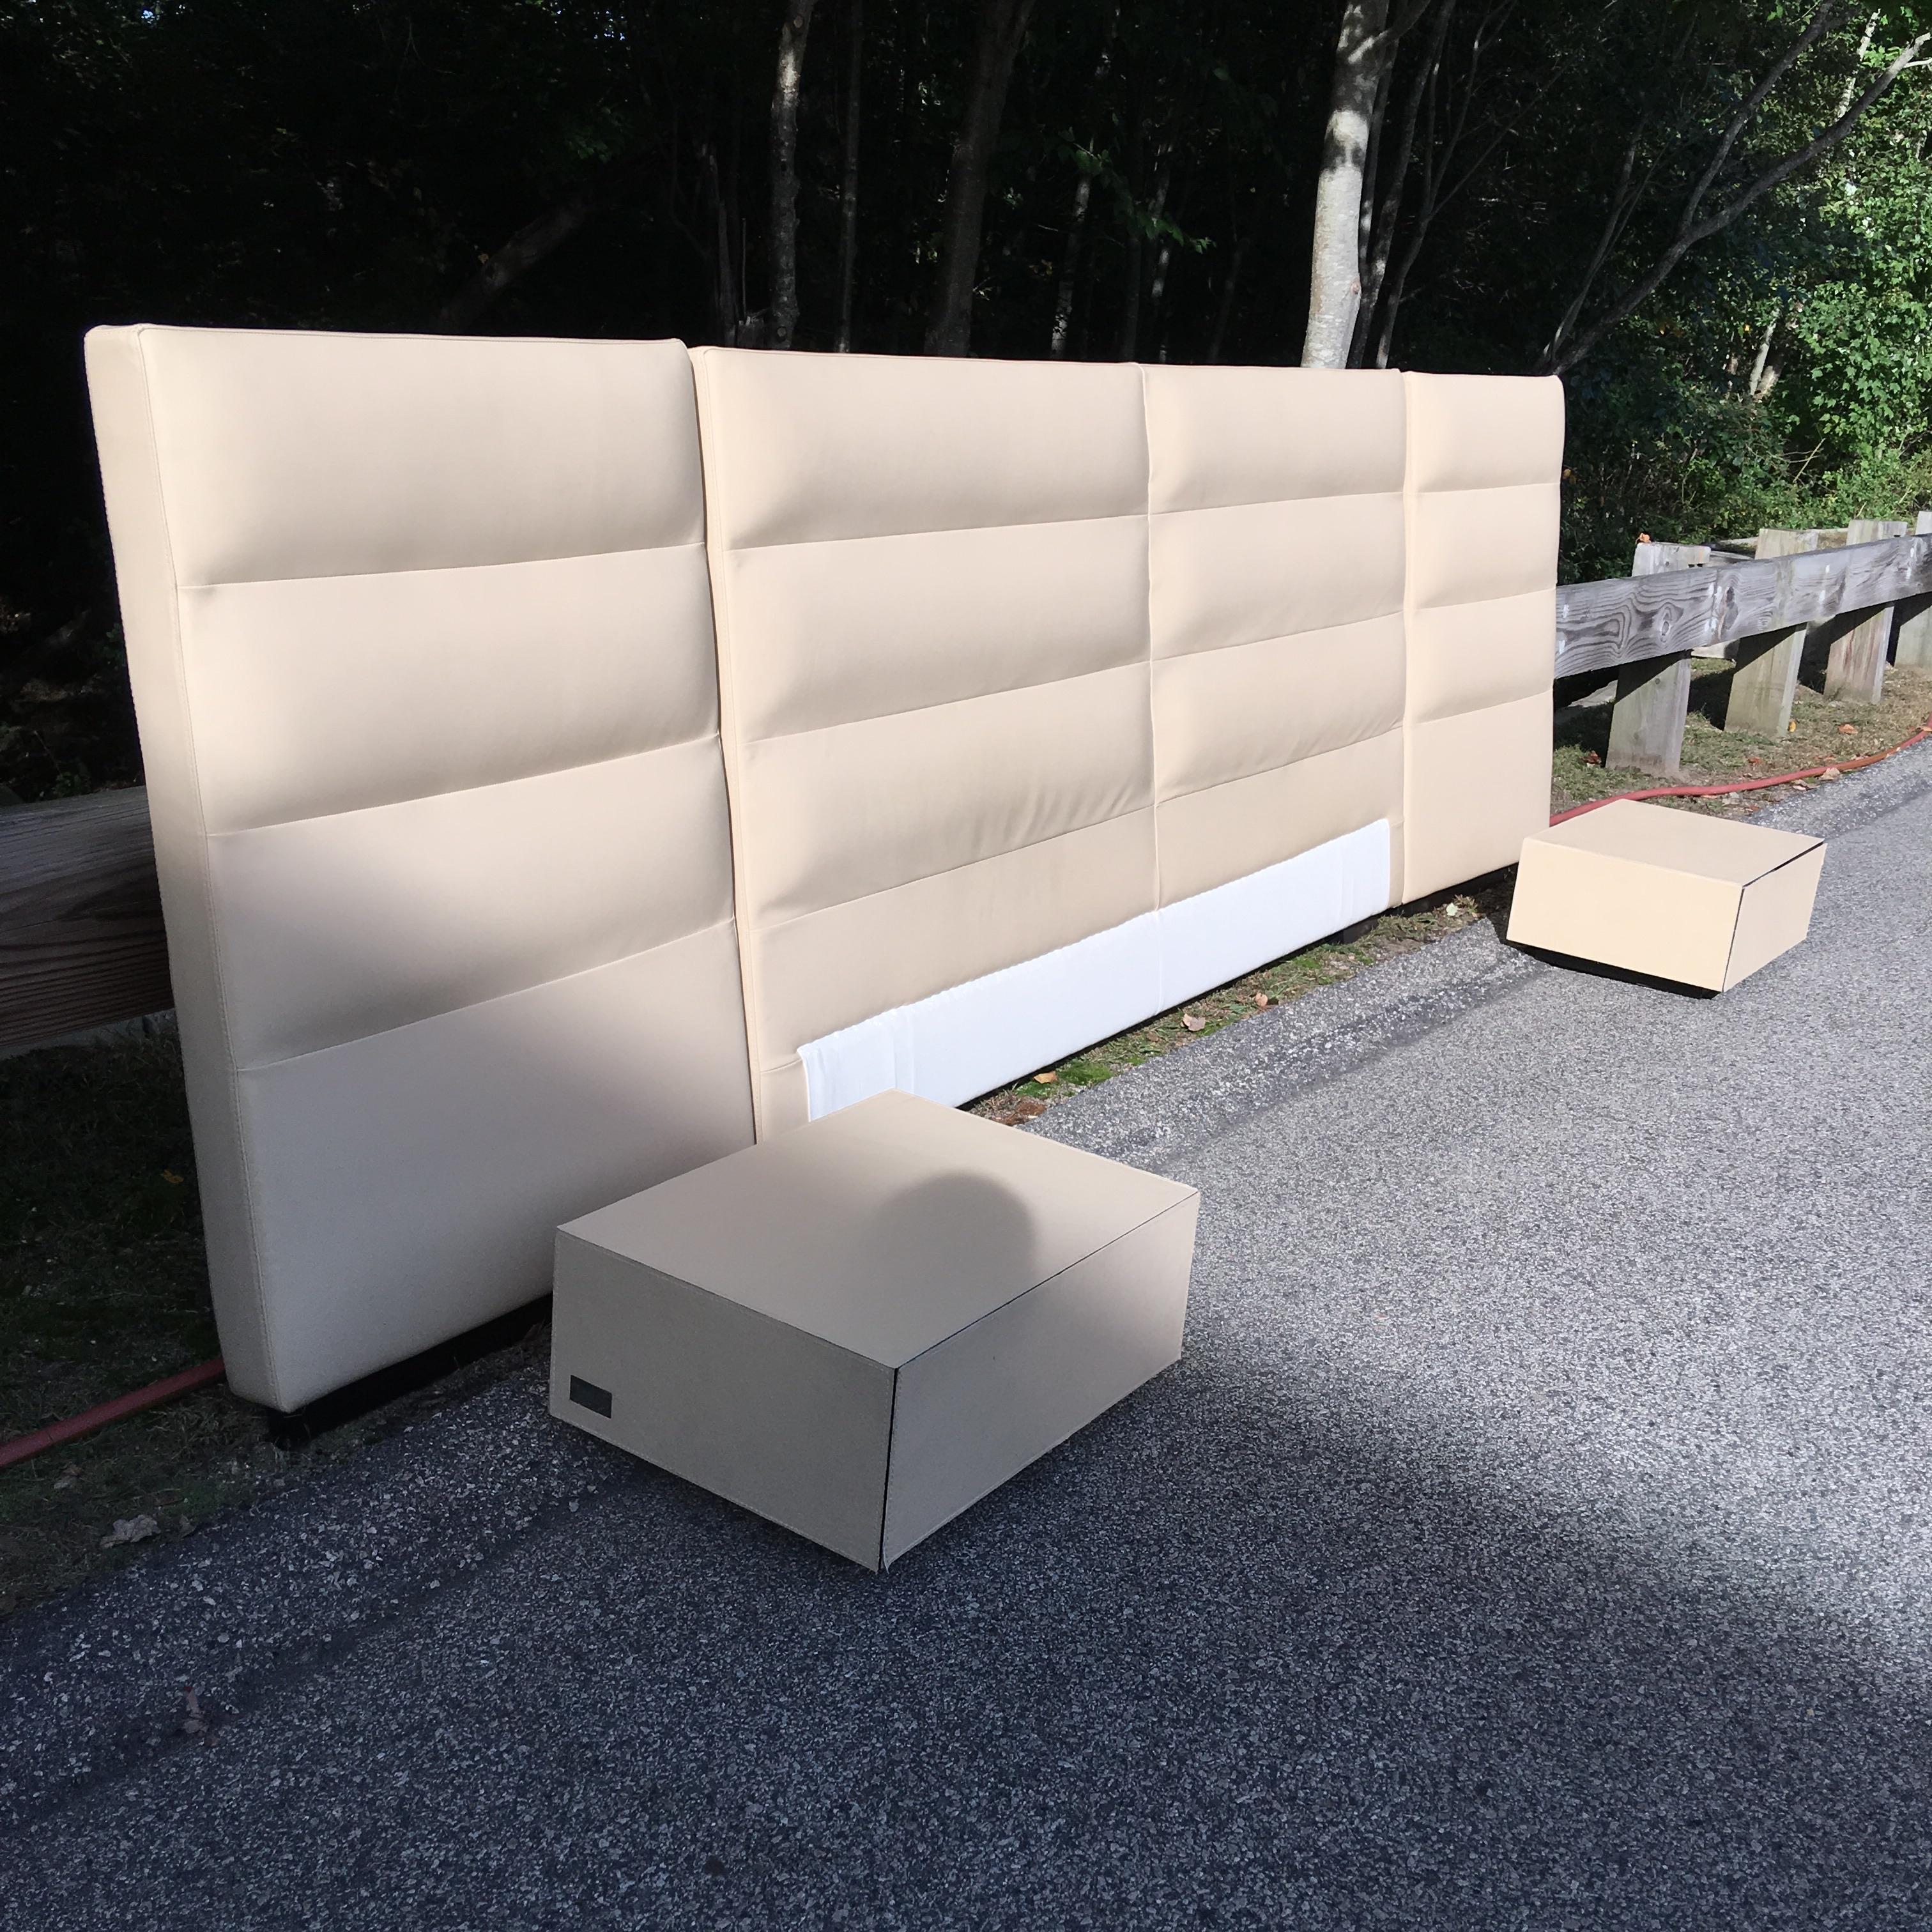 Fendi Casa King Size Leather Headboard with Integrated Leather Nightstands  In Good Condition For Sale In Hanover, MA